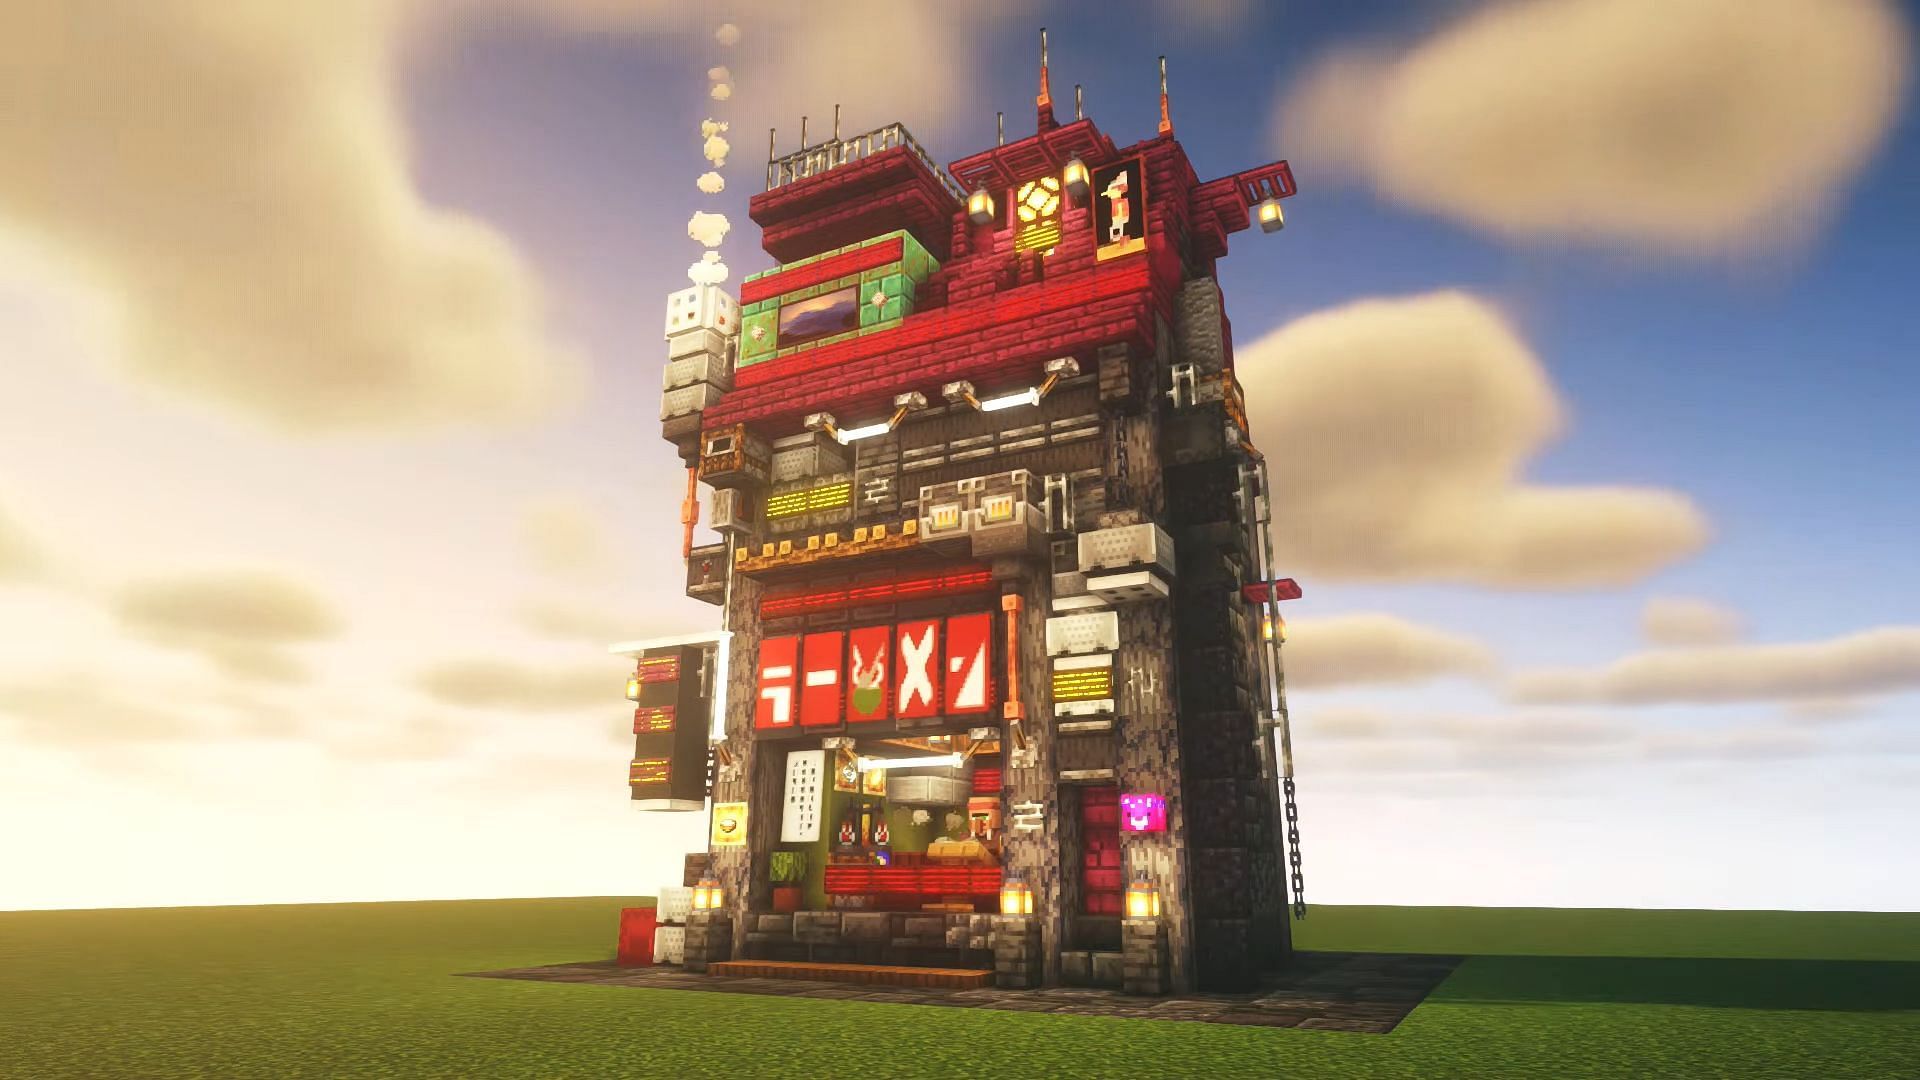 This shop certainly looks like an eye-catching place to grab some food in Minecraft (Image via Freedom./YouTube)